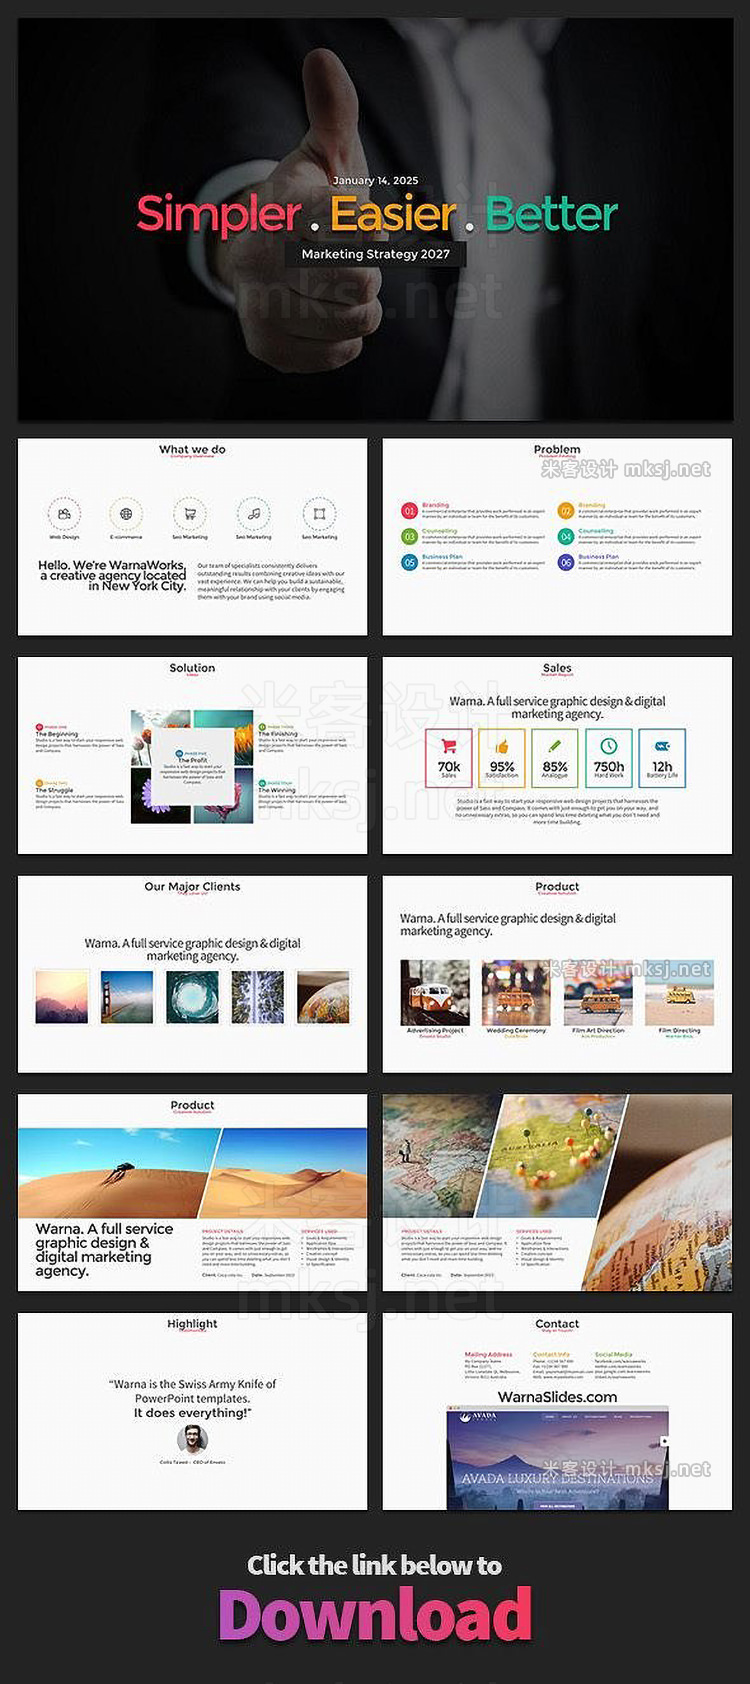 PPT模板 Simpler PowerPoint Template